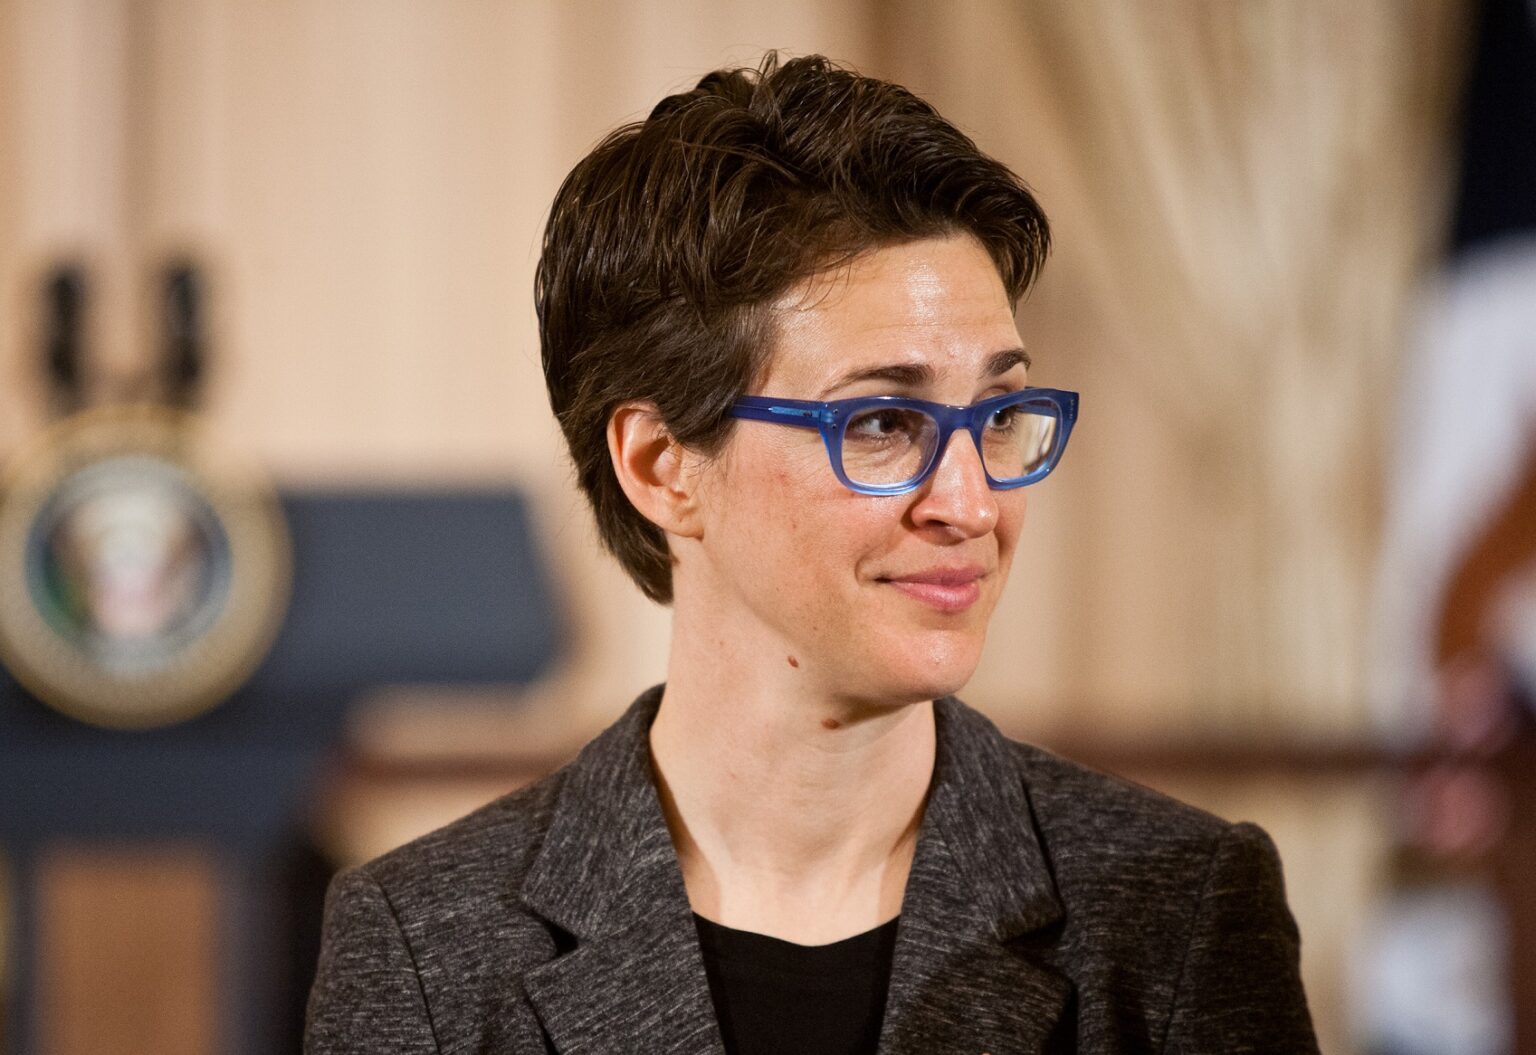 Rachel Maddow Just Signed A MASSIVE Contract Extension With MSNBC